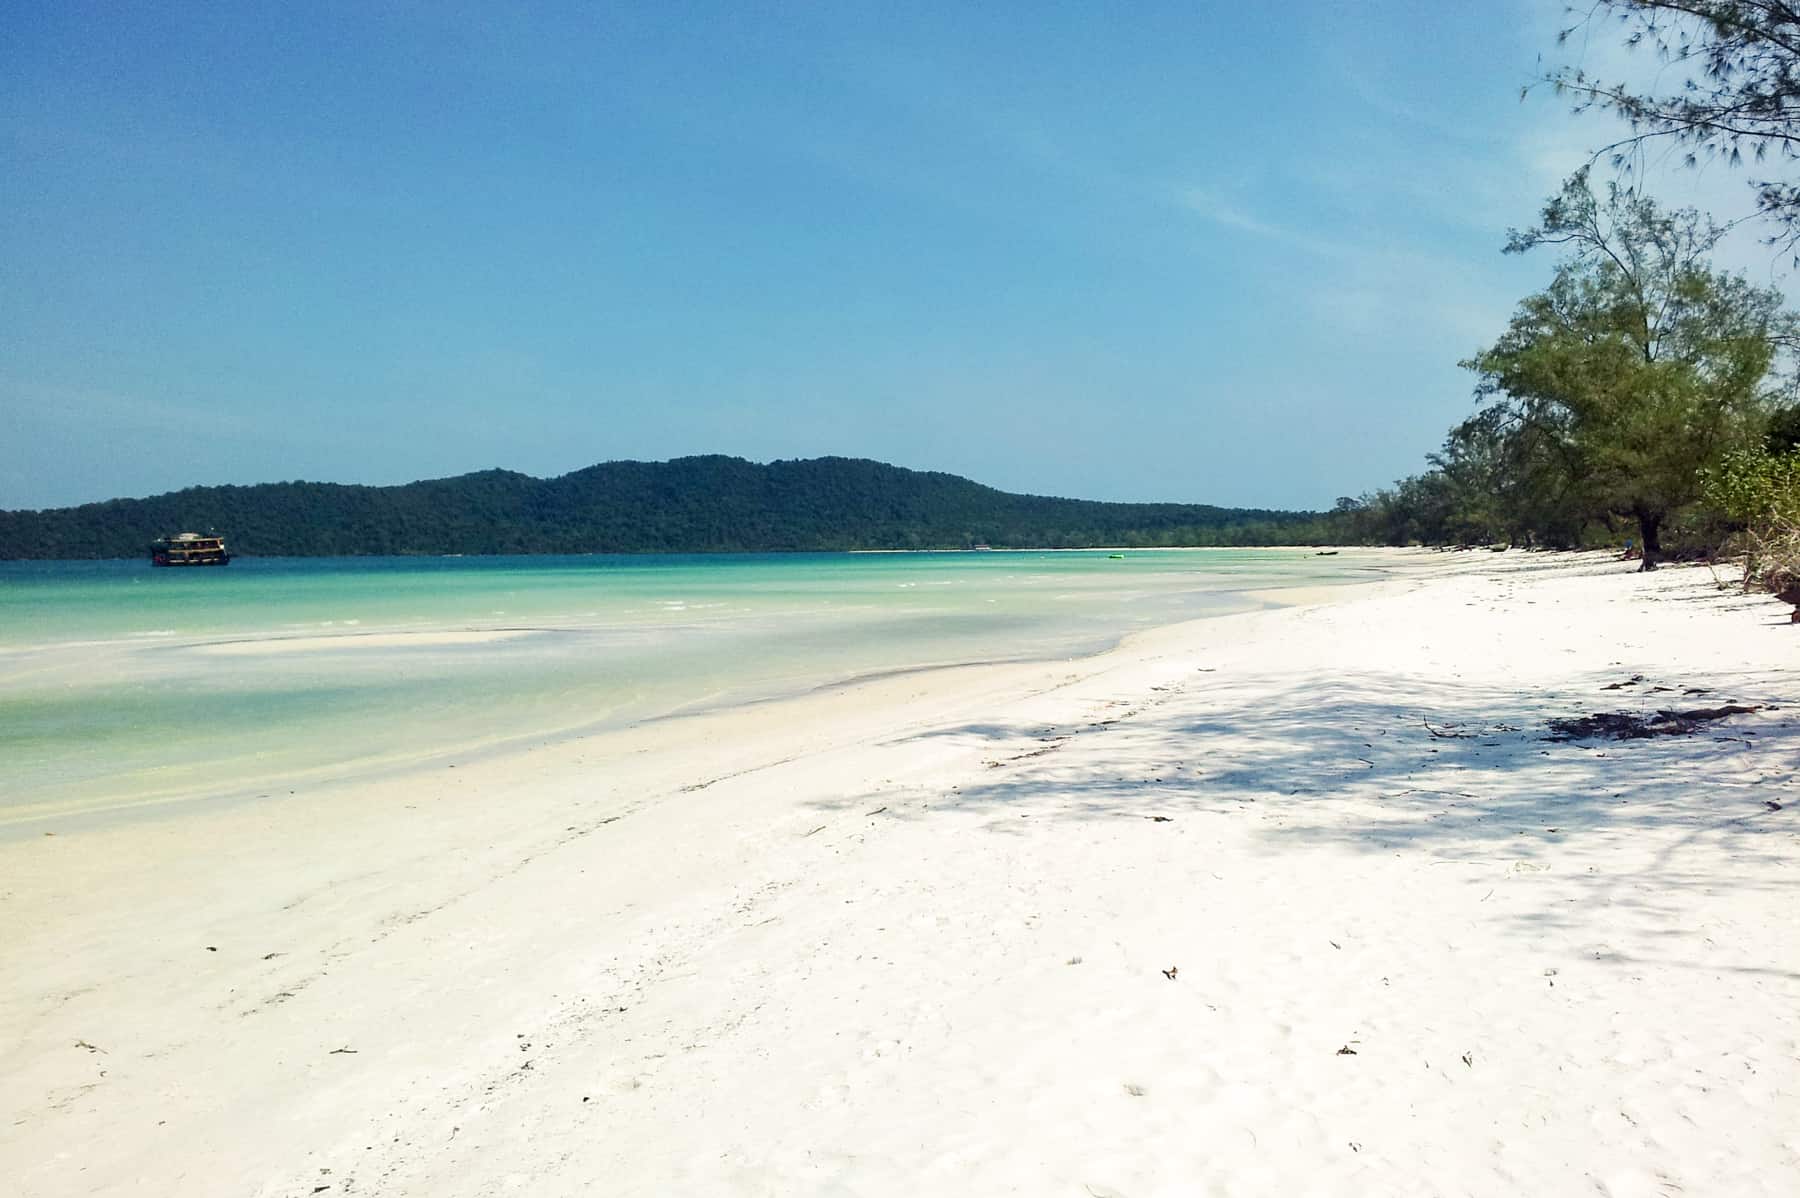 The untouched white sand beach of Koh Rong Samloem Cambodia that merges into agua water and a clear blue sky